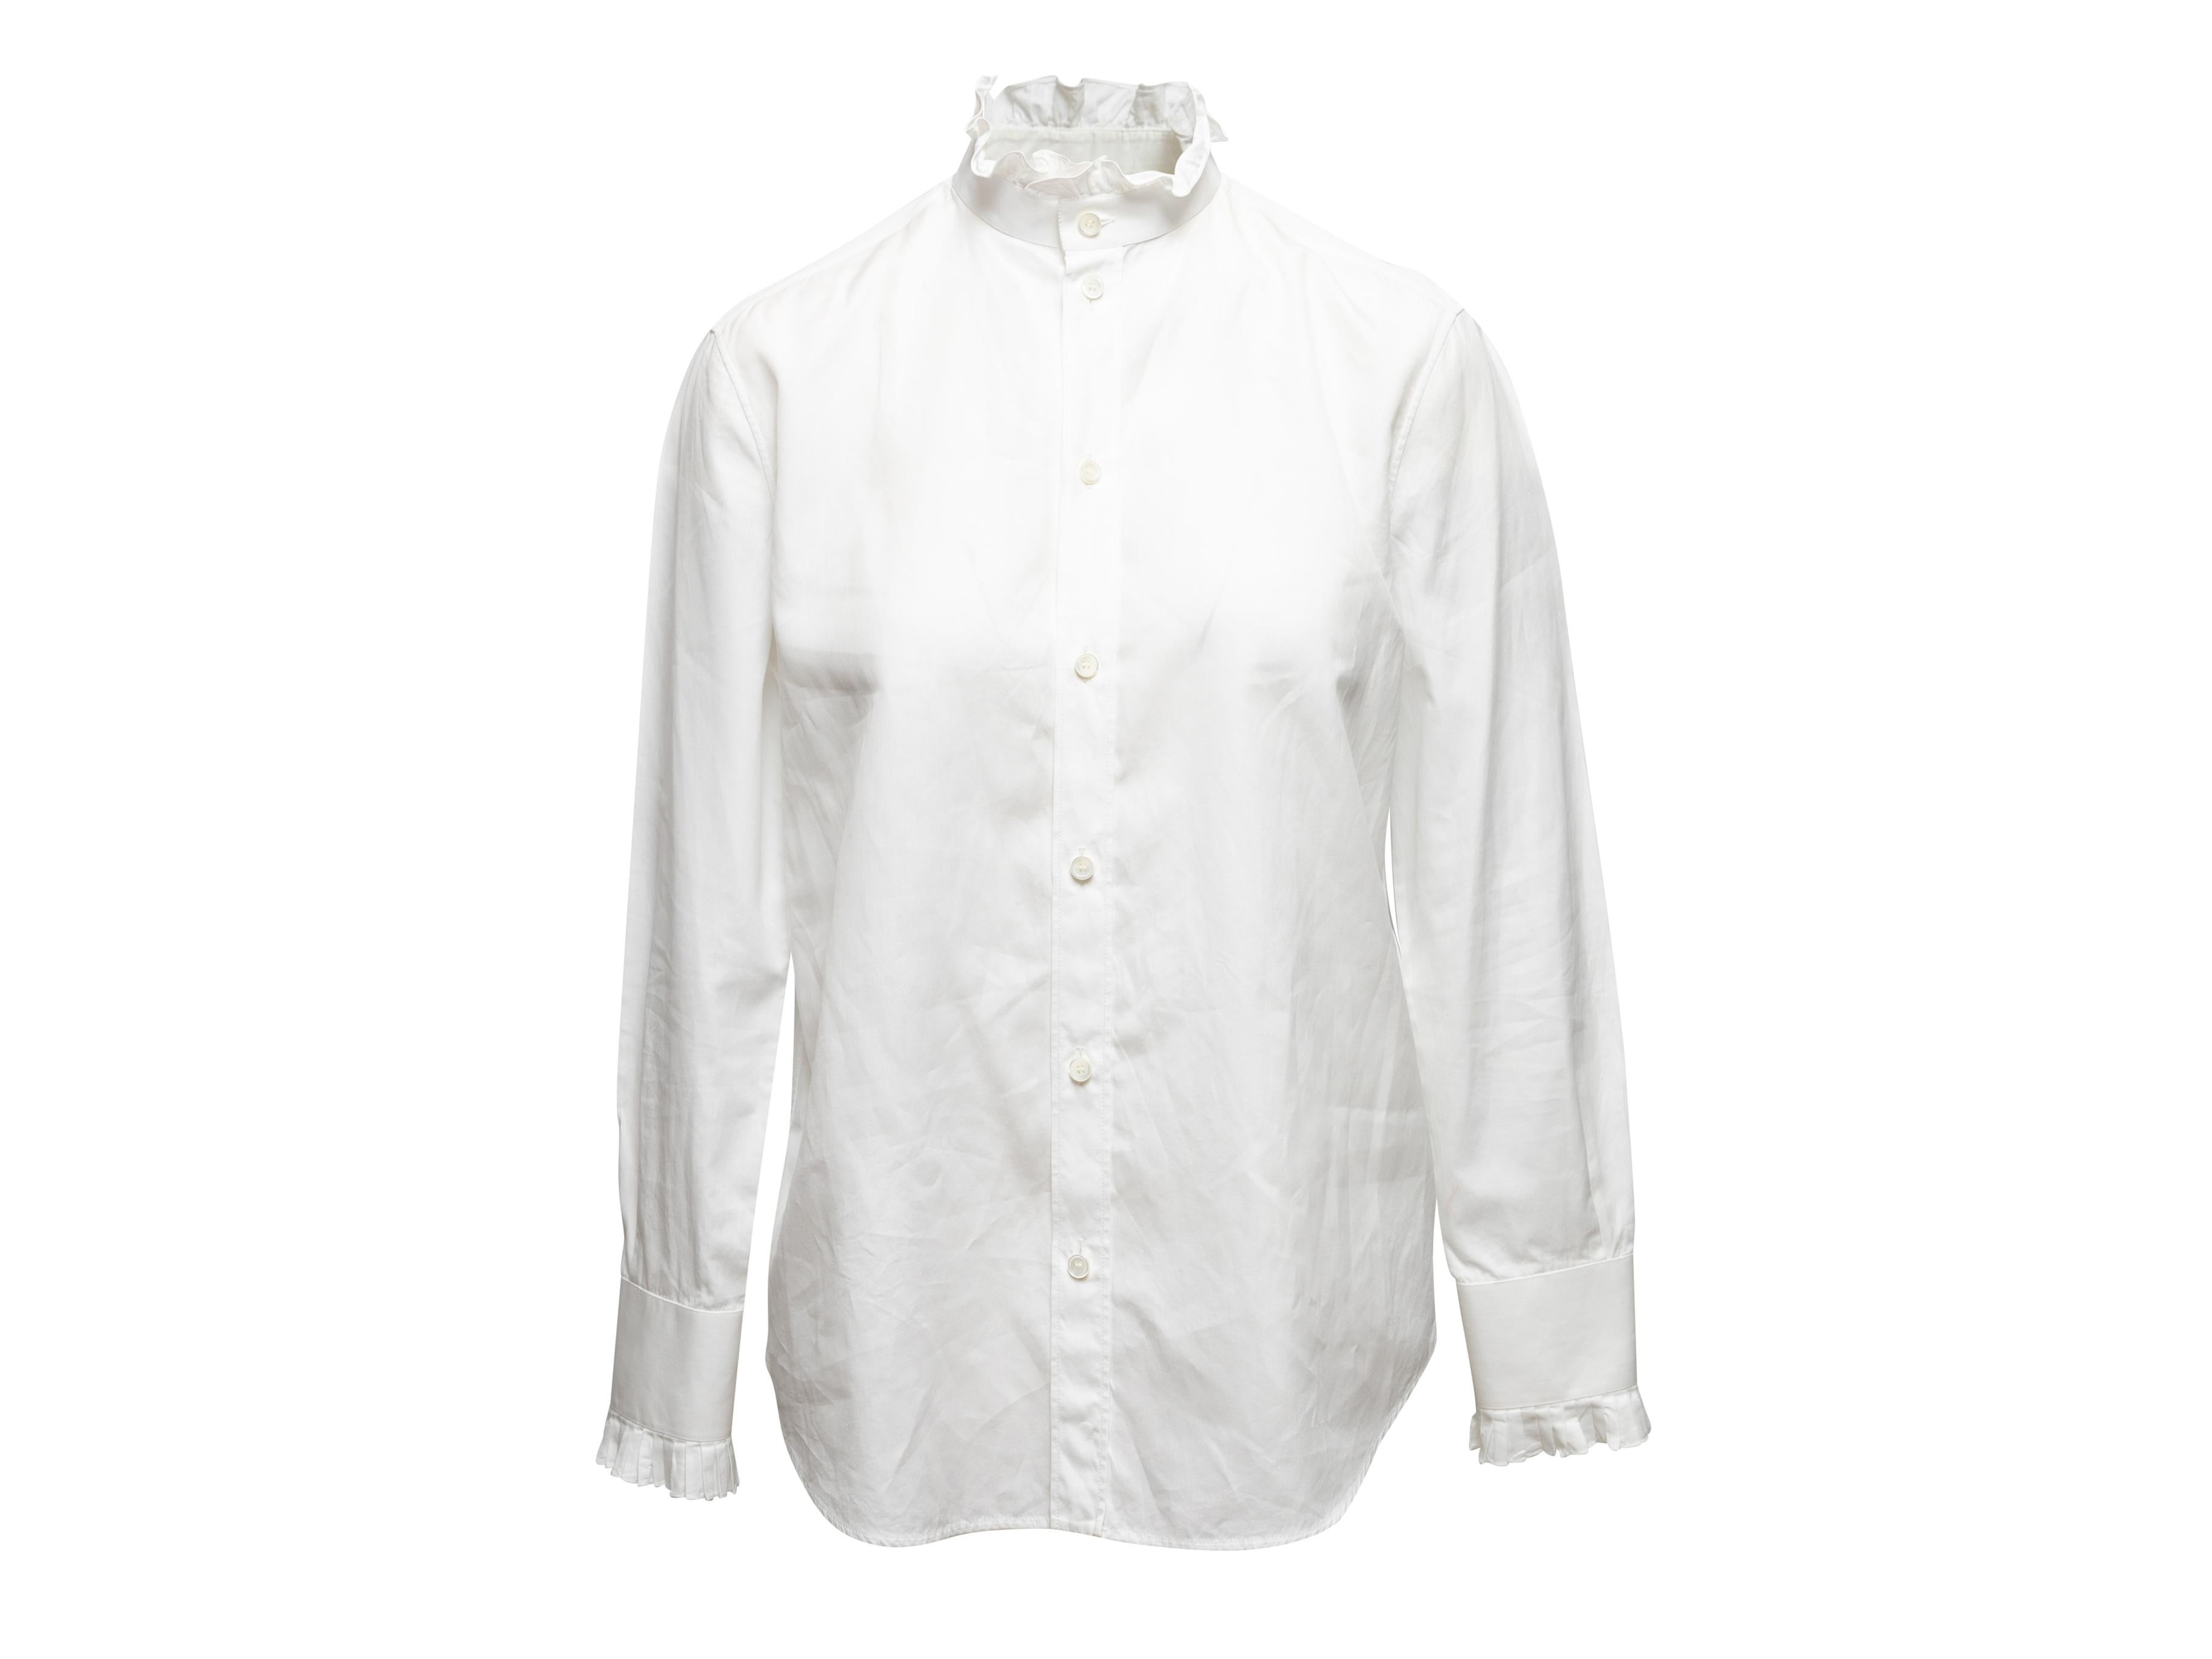 White long sleeve ruffle-trimmed button-up top by Celine. Stand collar. Button closures at center front. Designer size 40. V-neck. 30